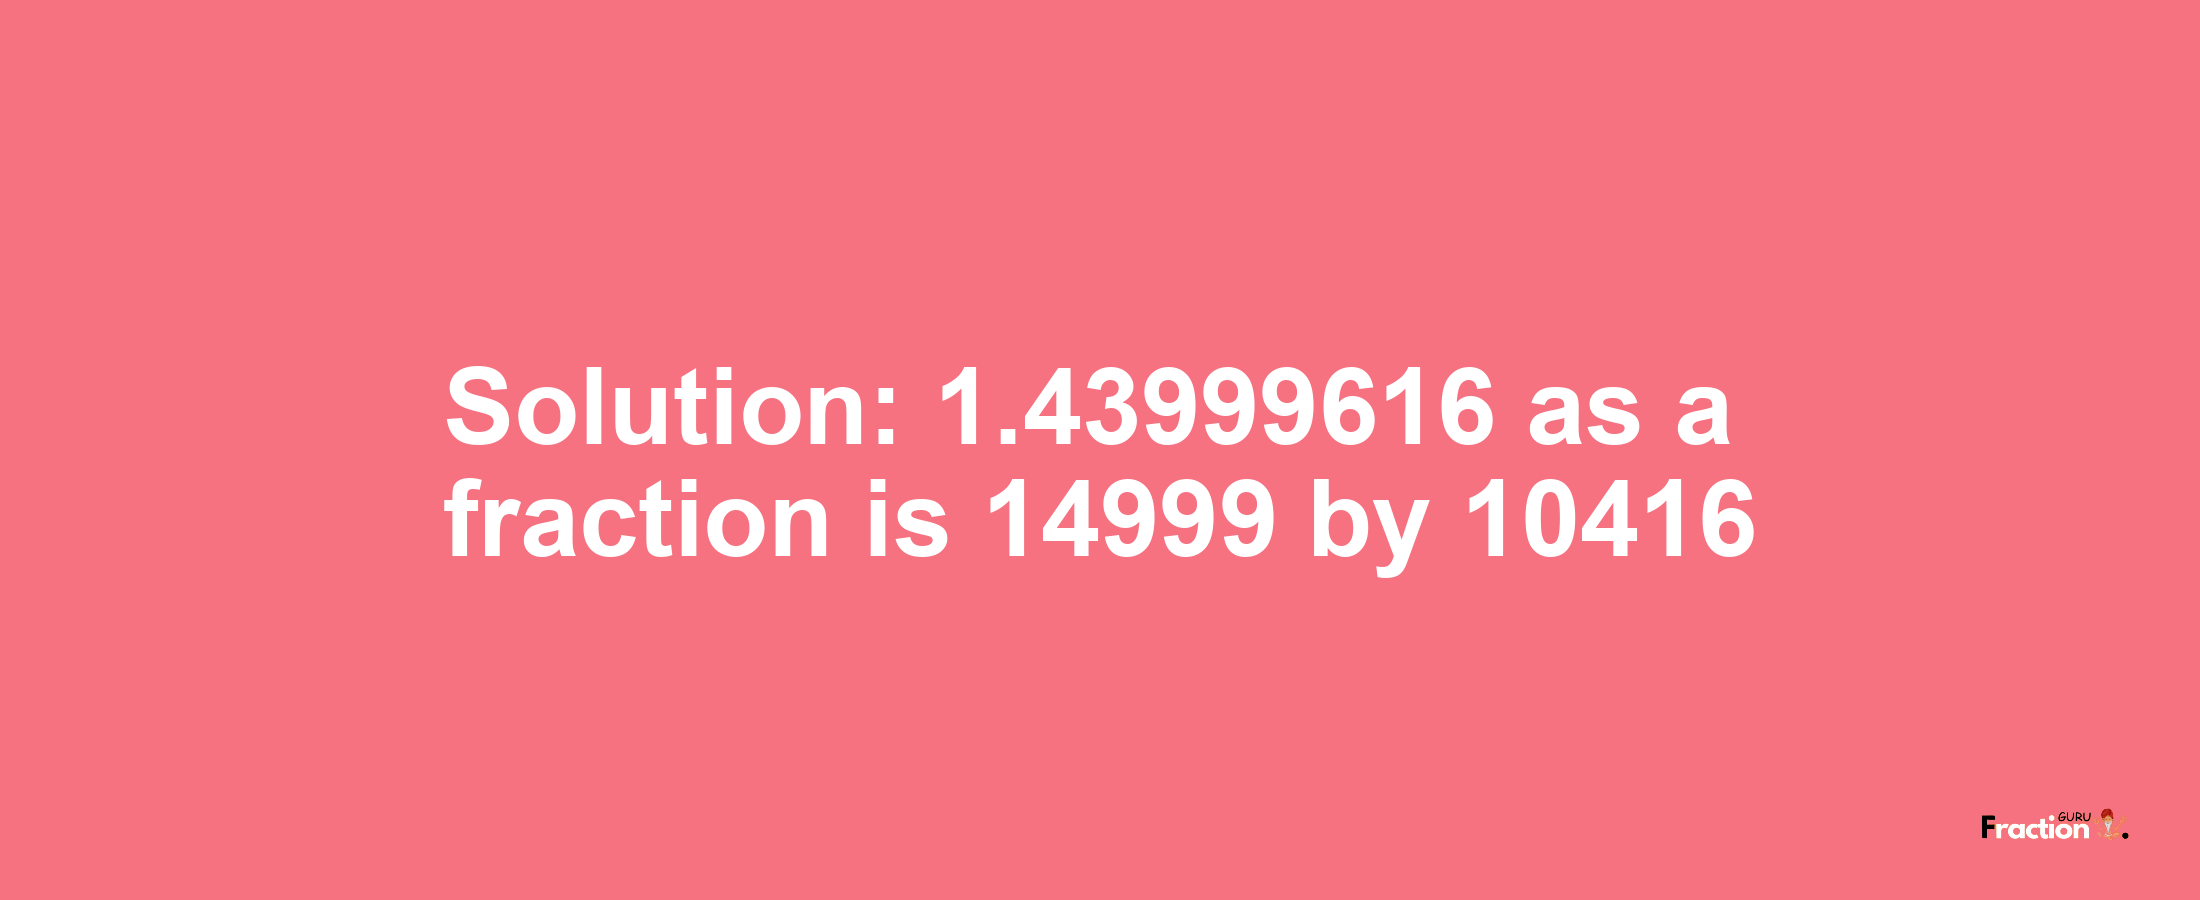 Solution:1.43999616 as a fraction is 14999/10416